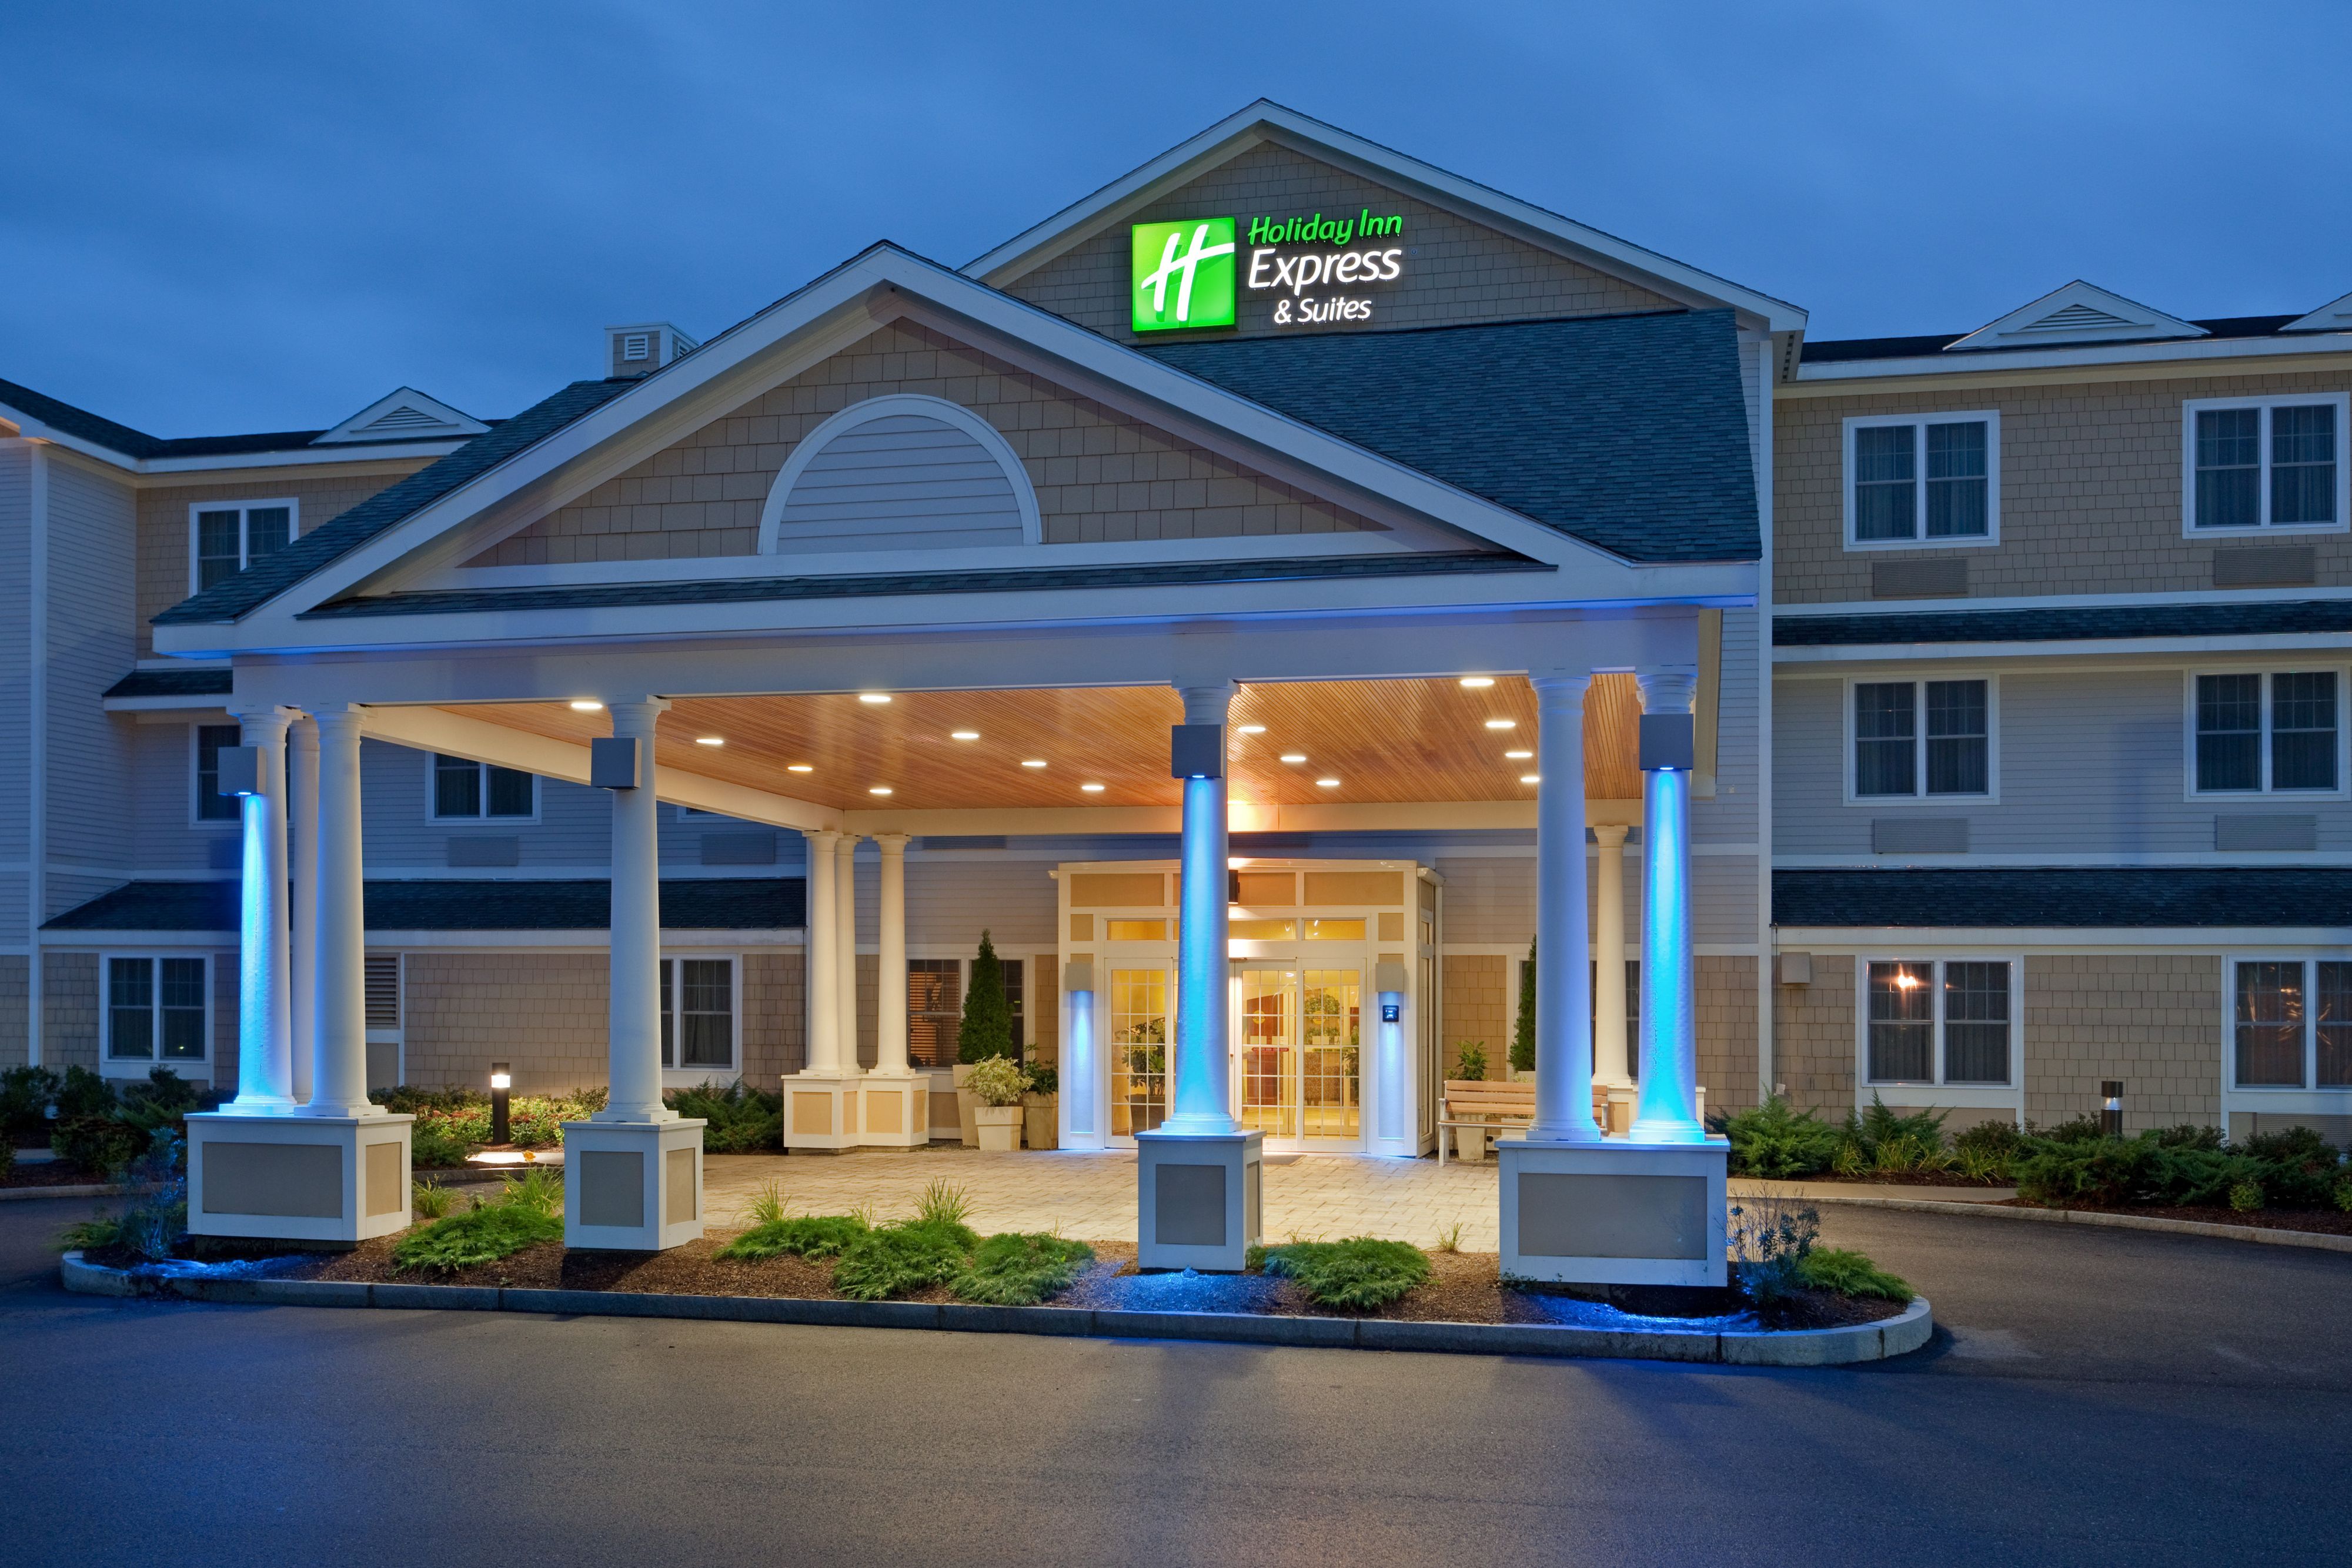 holiday-inn-express-and-suites-rochester-2533065840-original.jpg